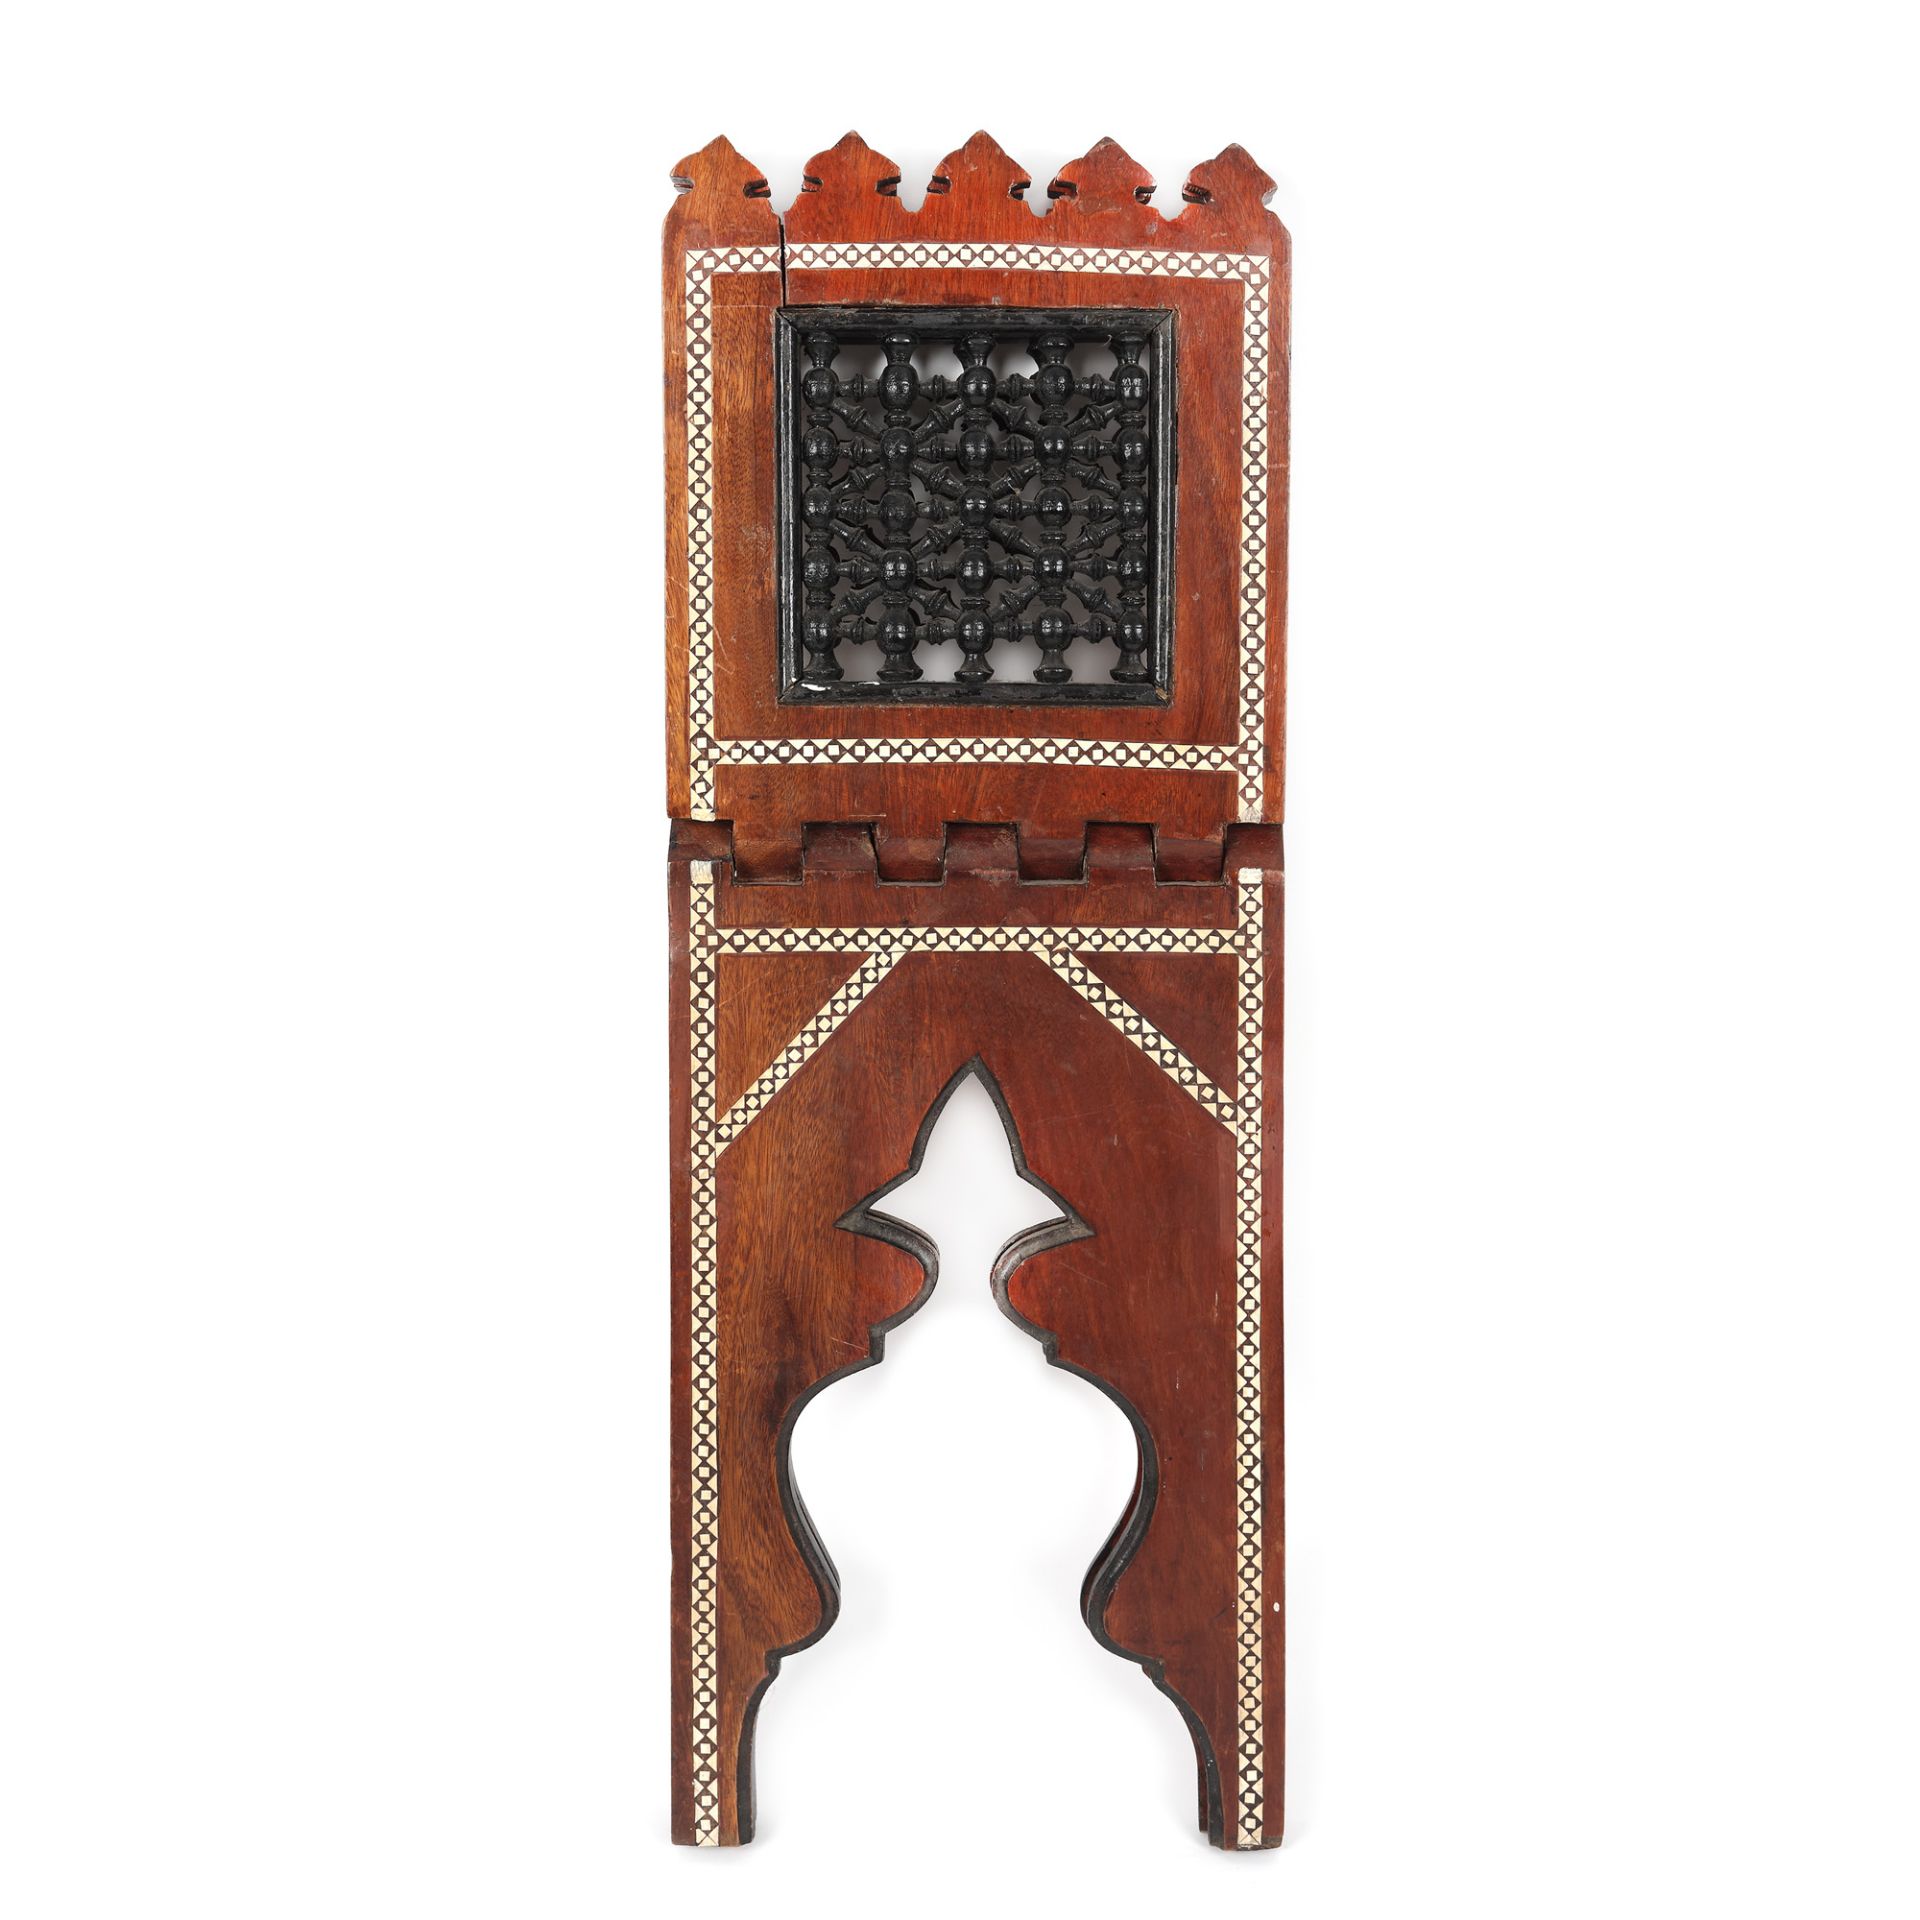 Nutwood Koran stand, decorated with ivory inlays, Maur style, late 19th century - Image 3 of 3